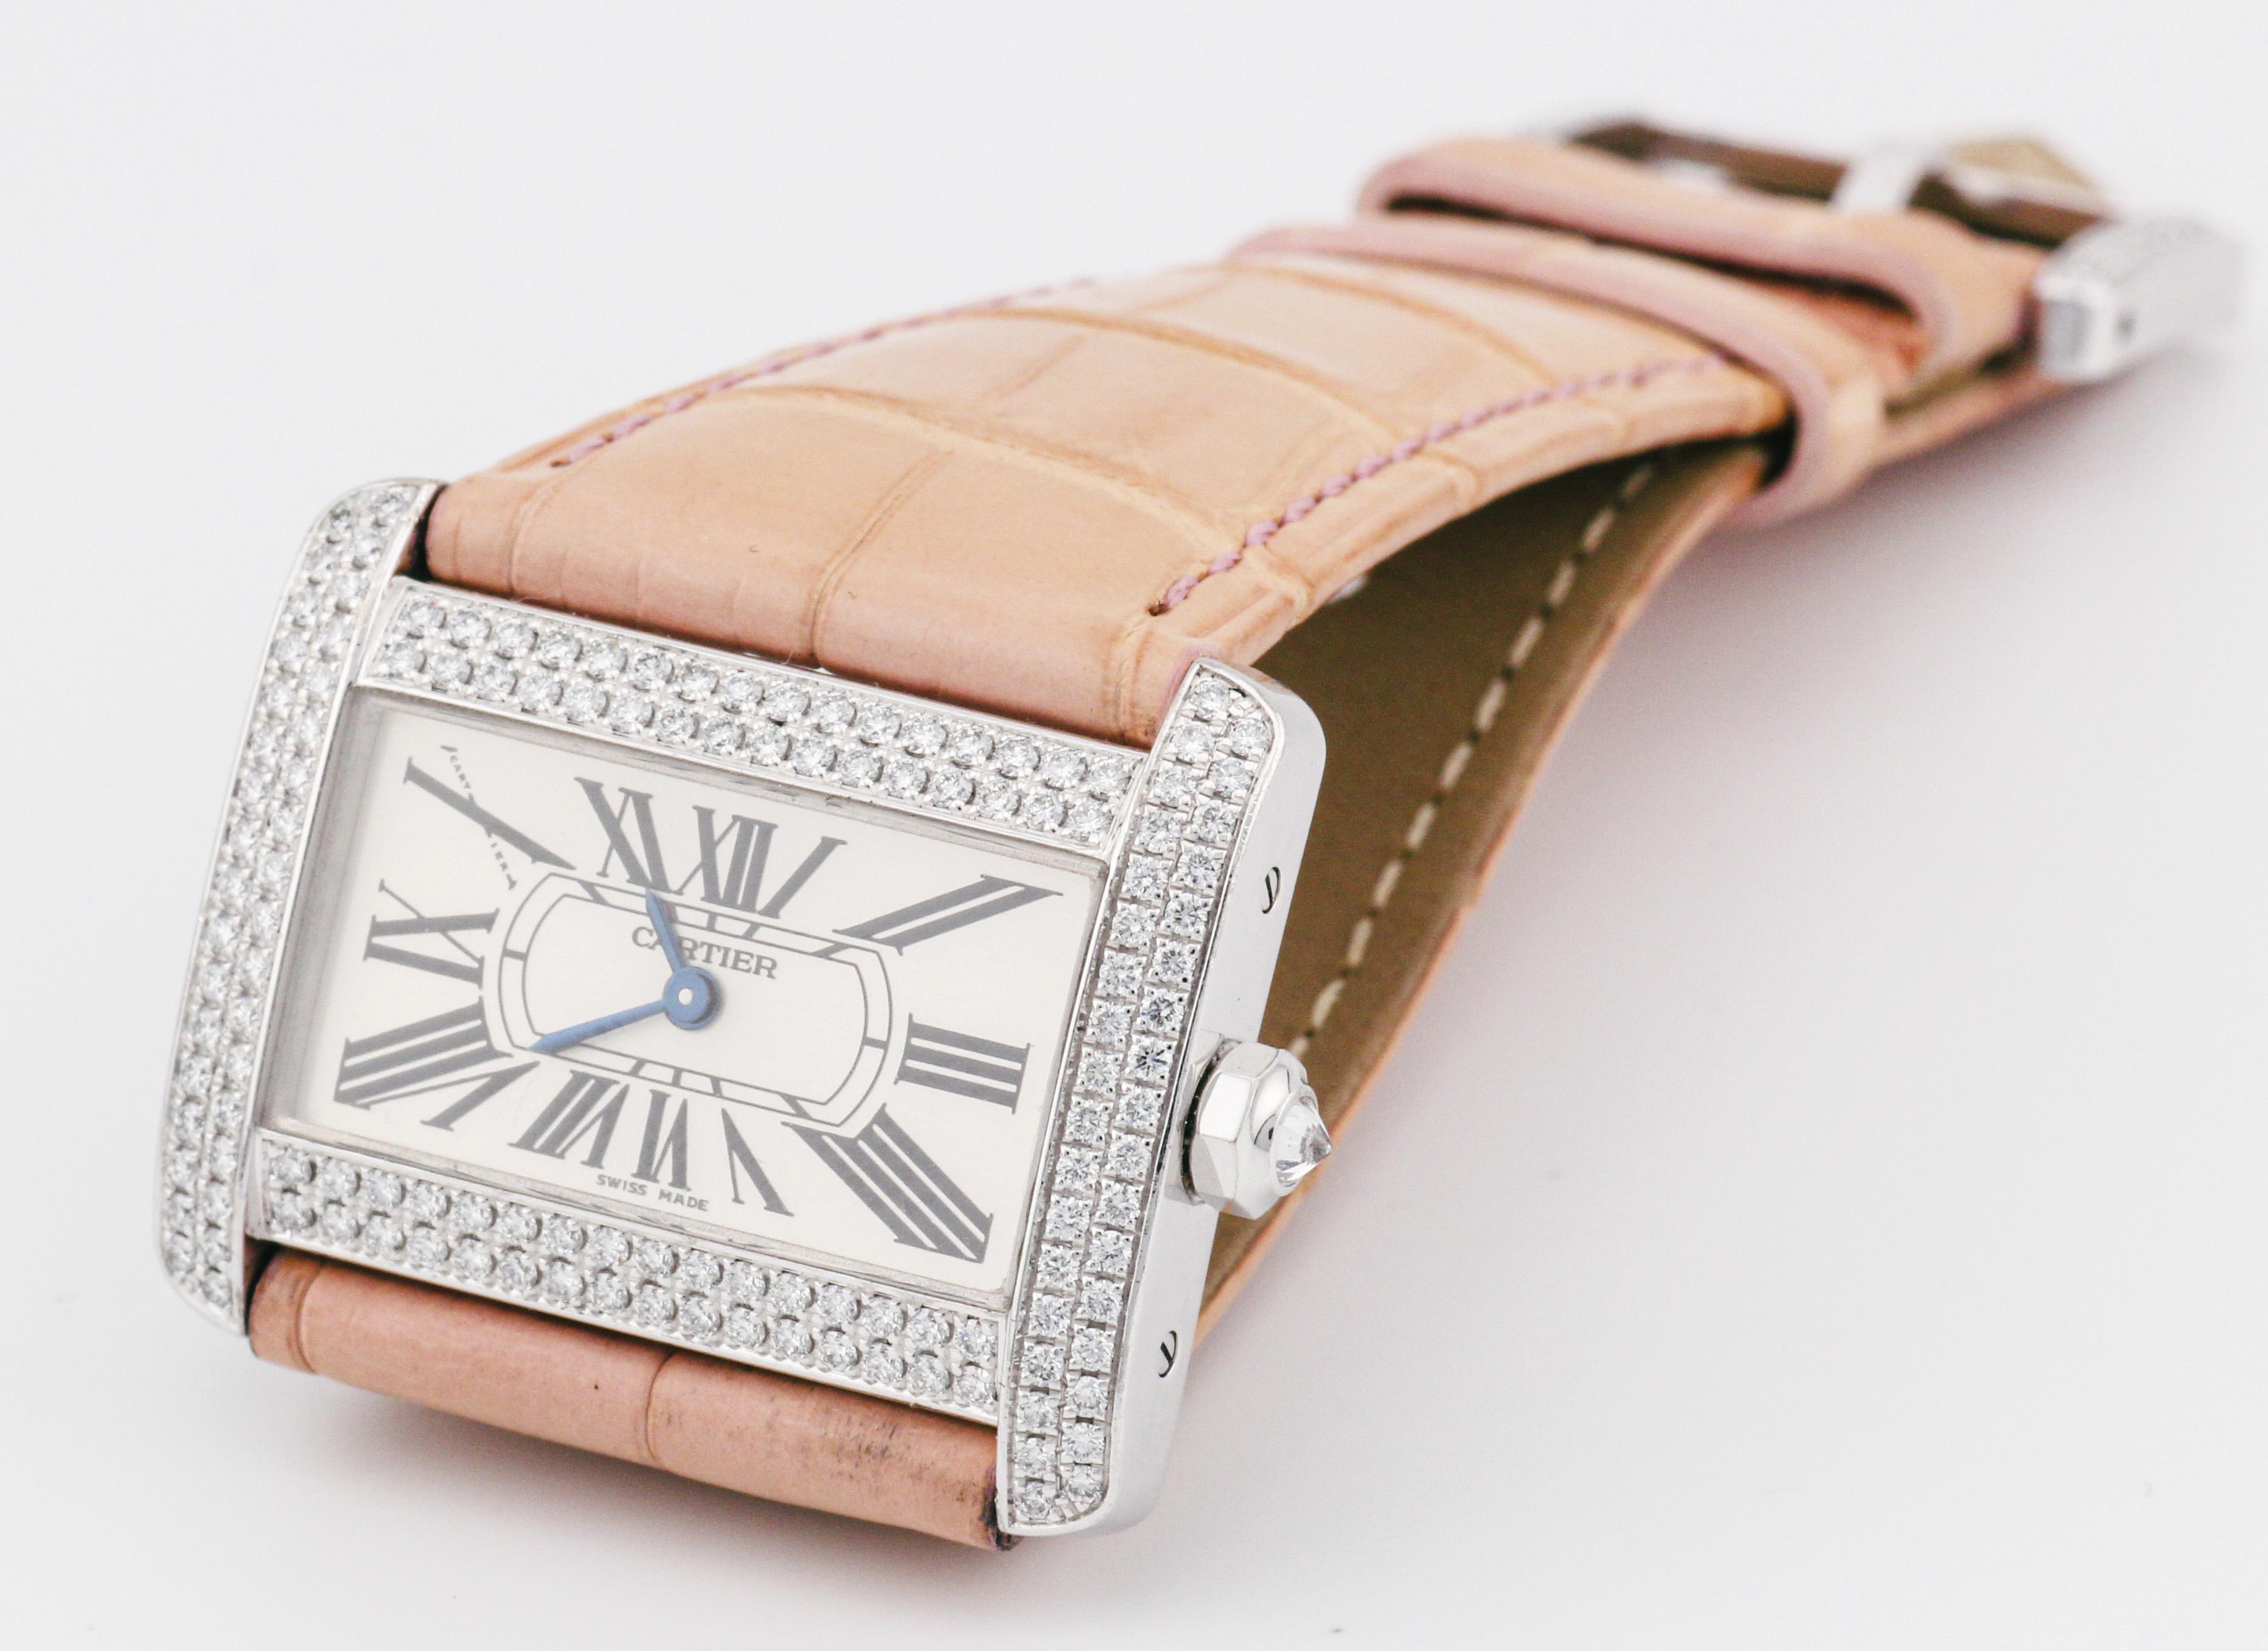 The Cartier Divan 18K White Gold Watch with 2 Rows Diamond Bezel and leather strap, featuring a Diamond Buckle, is a true embodiment of Cartier's legacy of luxury, sophistication, and timeless design. This exceptional timepiece marries the pristine